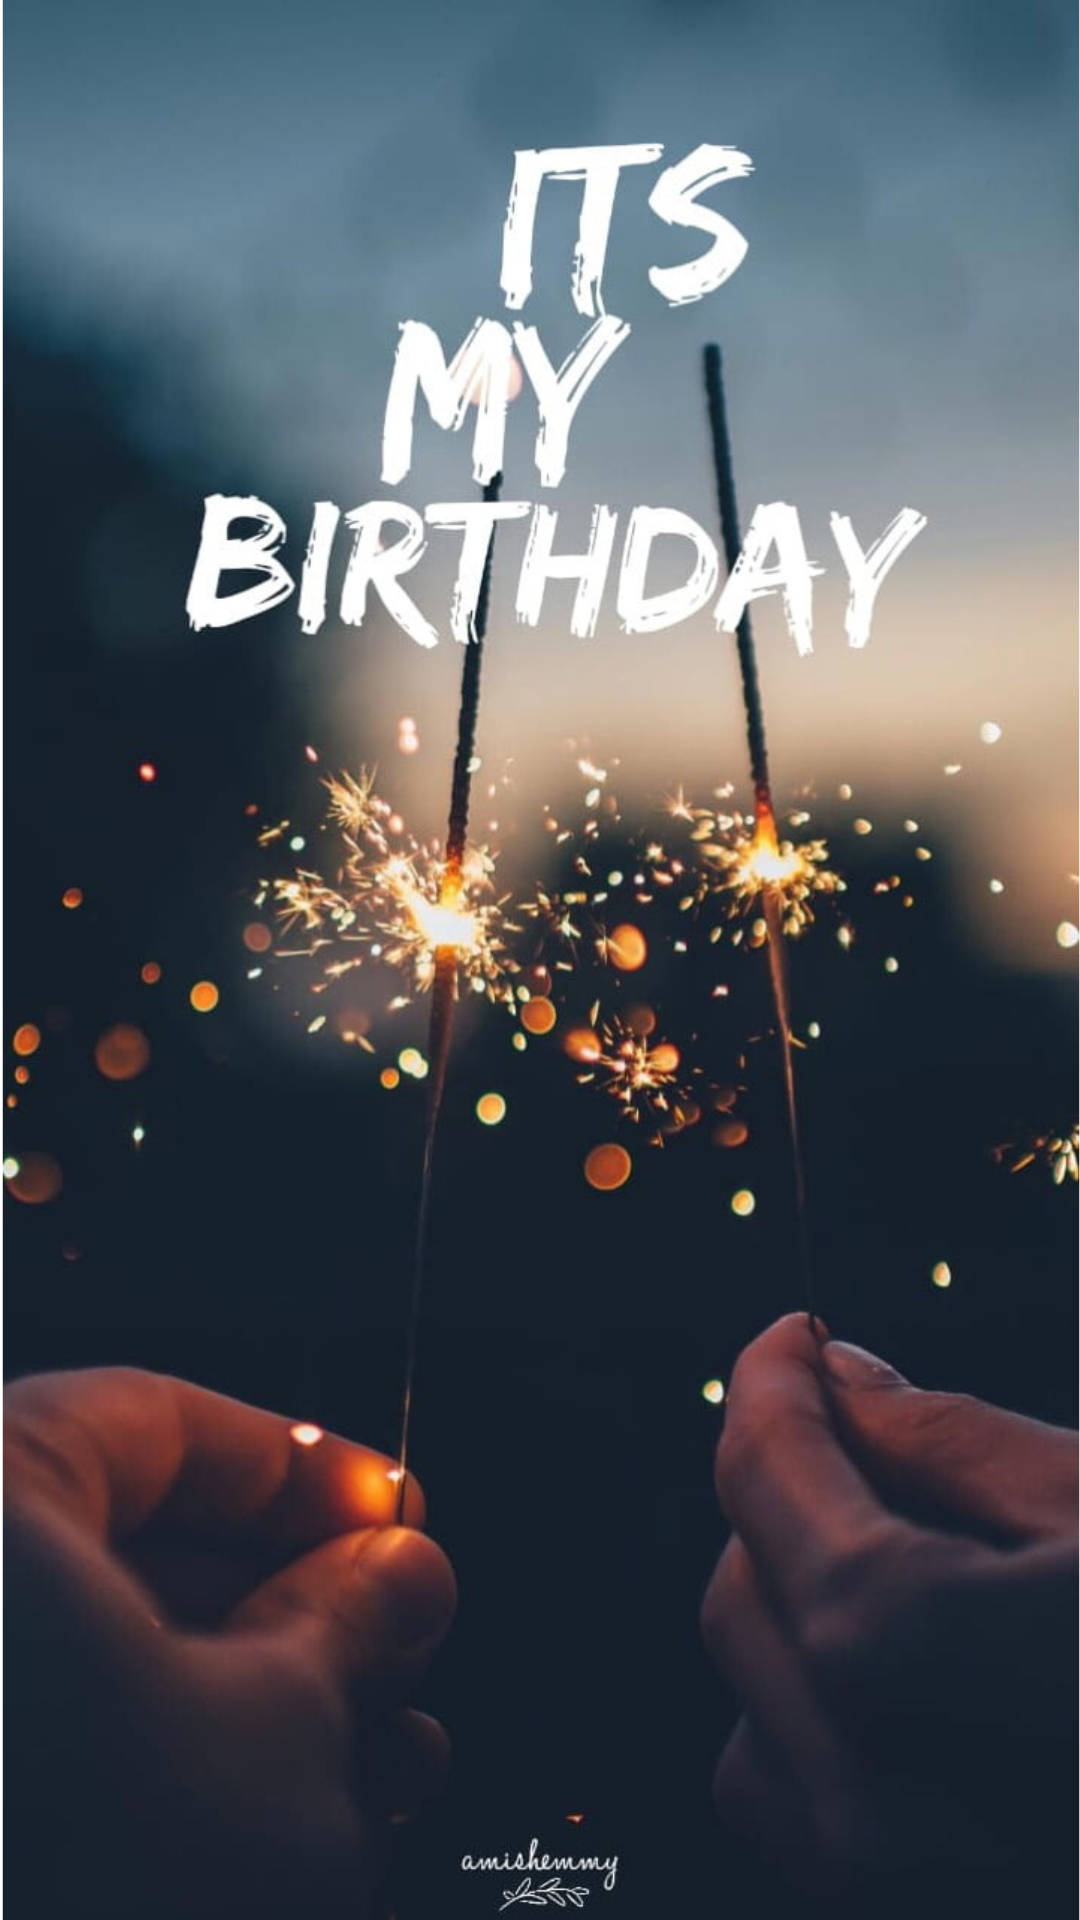 “It’s My Birthday” Over Sparklers Image Wallpaper